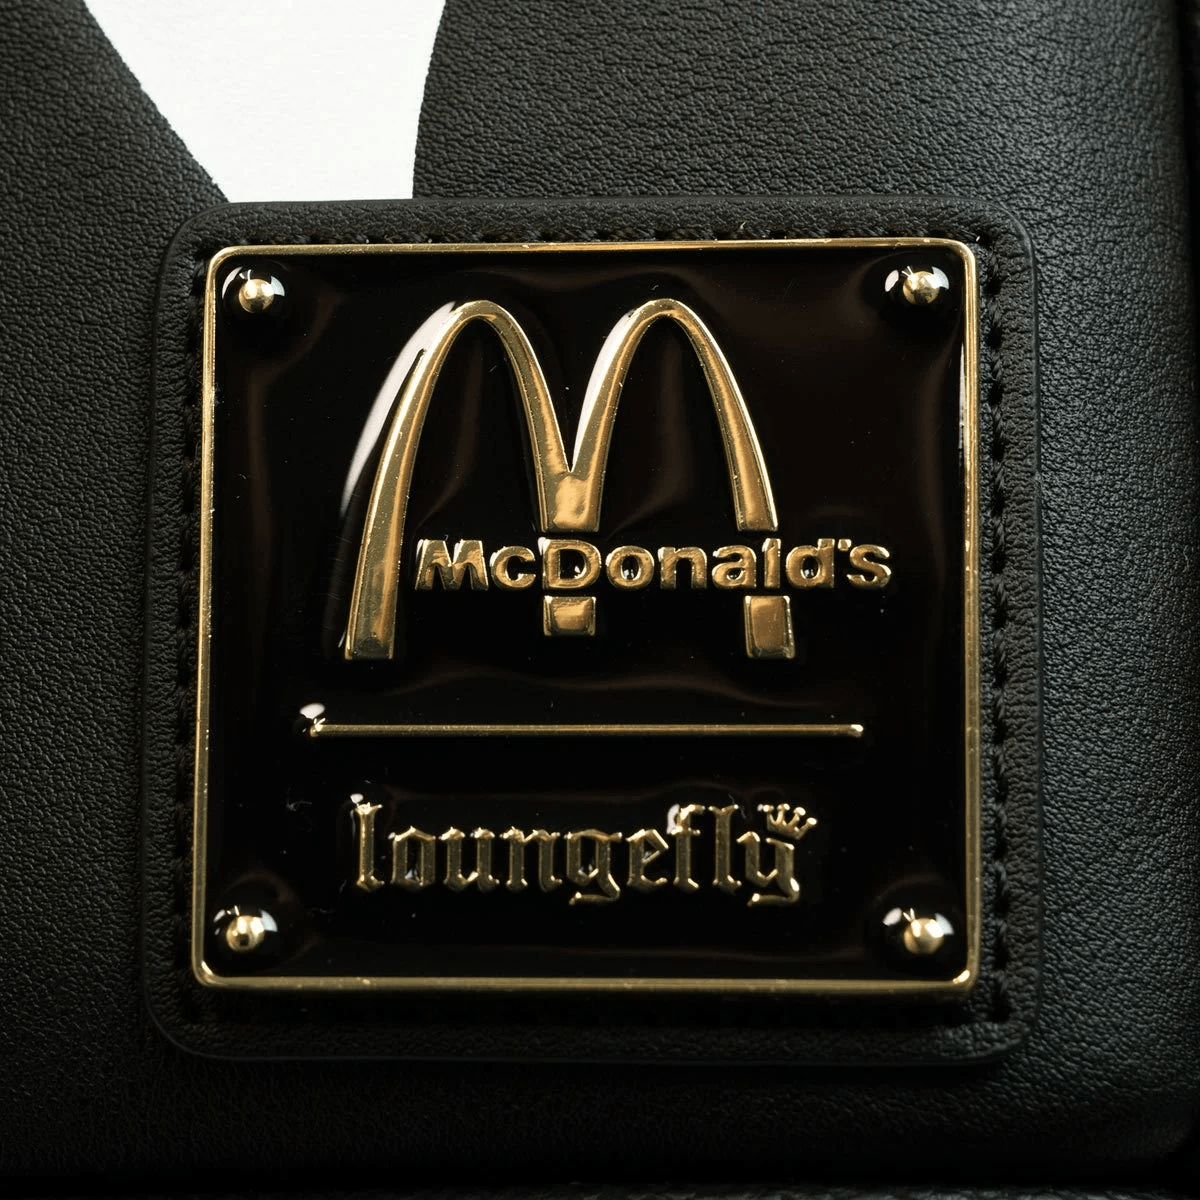 LOUMCDBK0004 Mcdonalds - Vampire McNugget US Exclusive Cosplay Mini Backpack [RS] - Loungefly - Titan Pop Culture